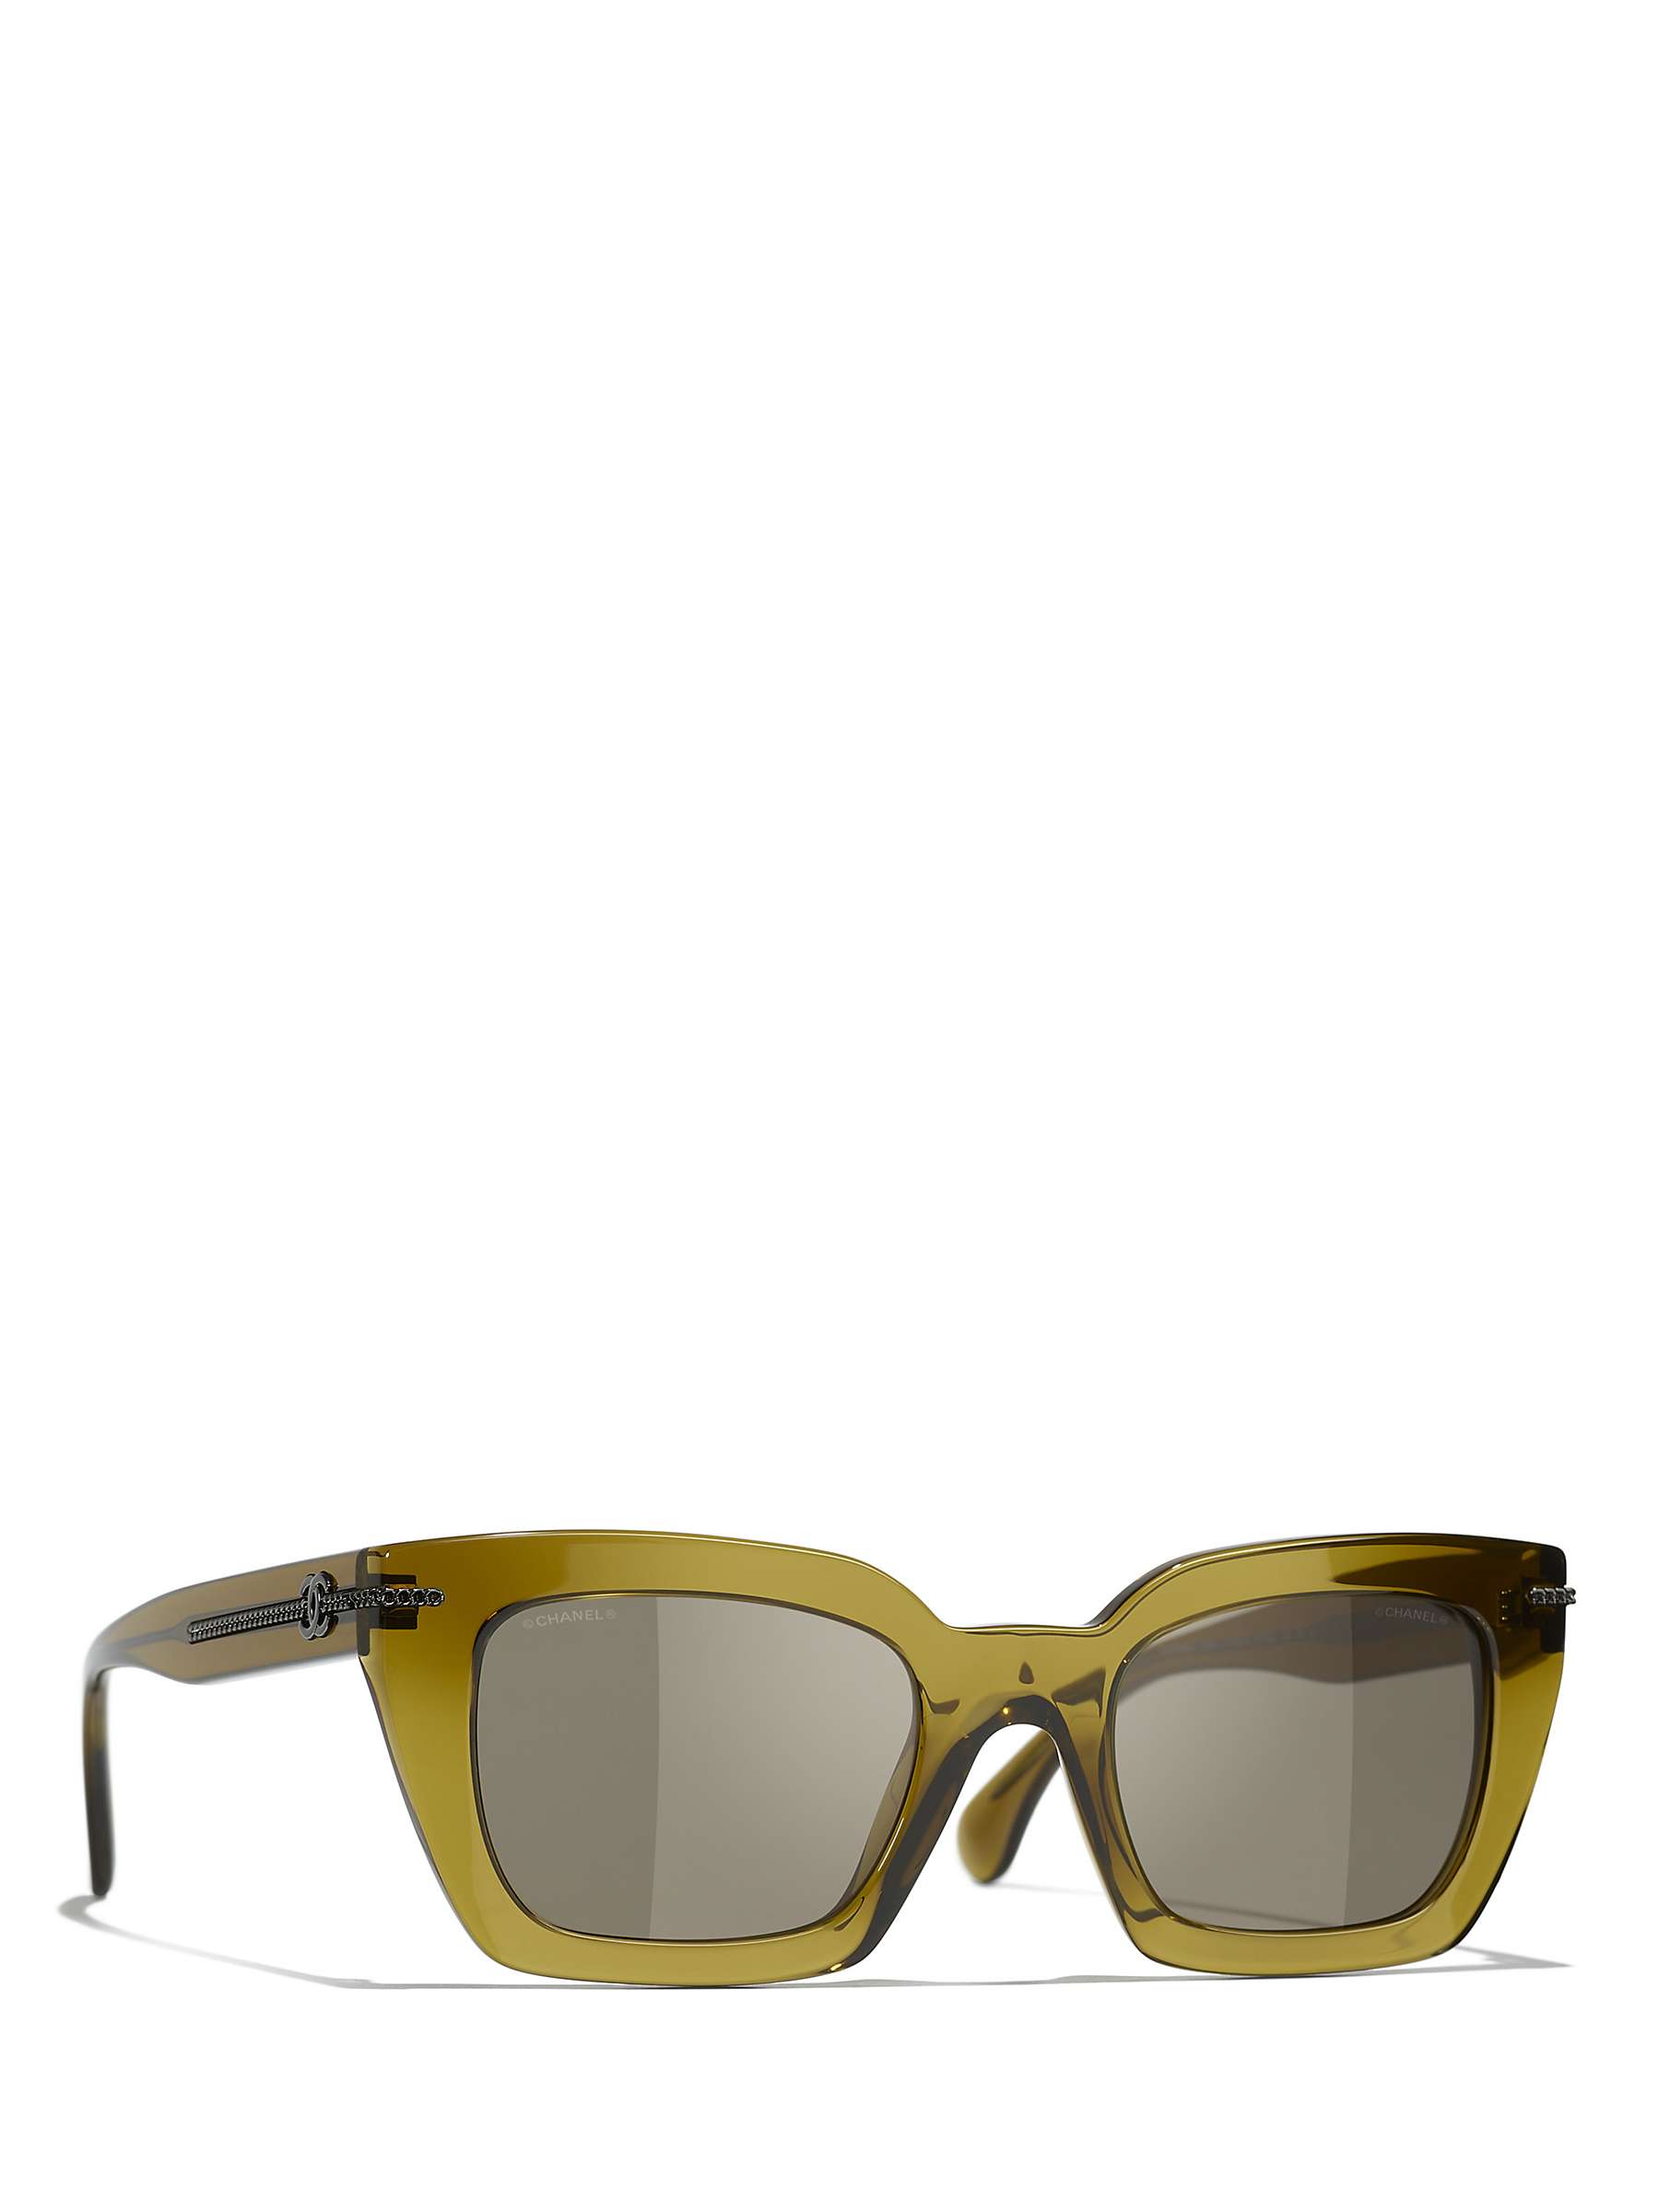 Buy CHANEL Rectangular Sunglasses CH5509, Olive/Brown Online at johnlewis.com